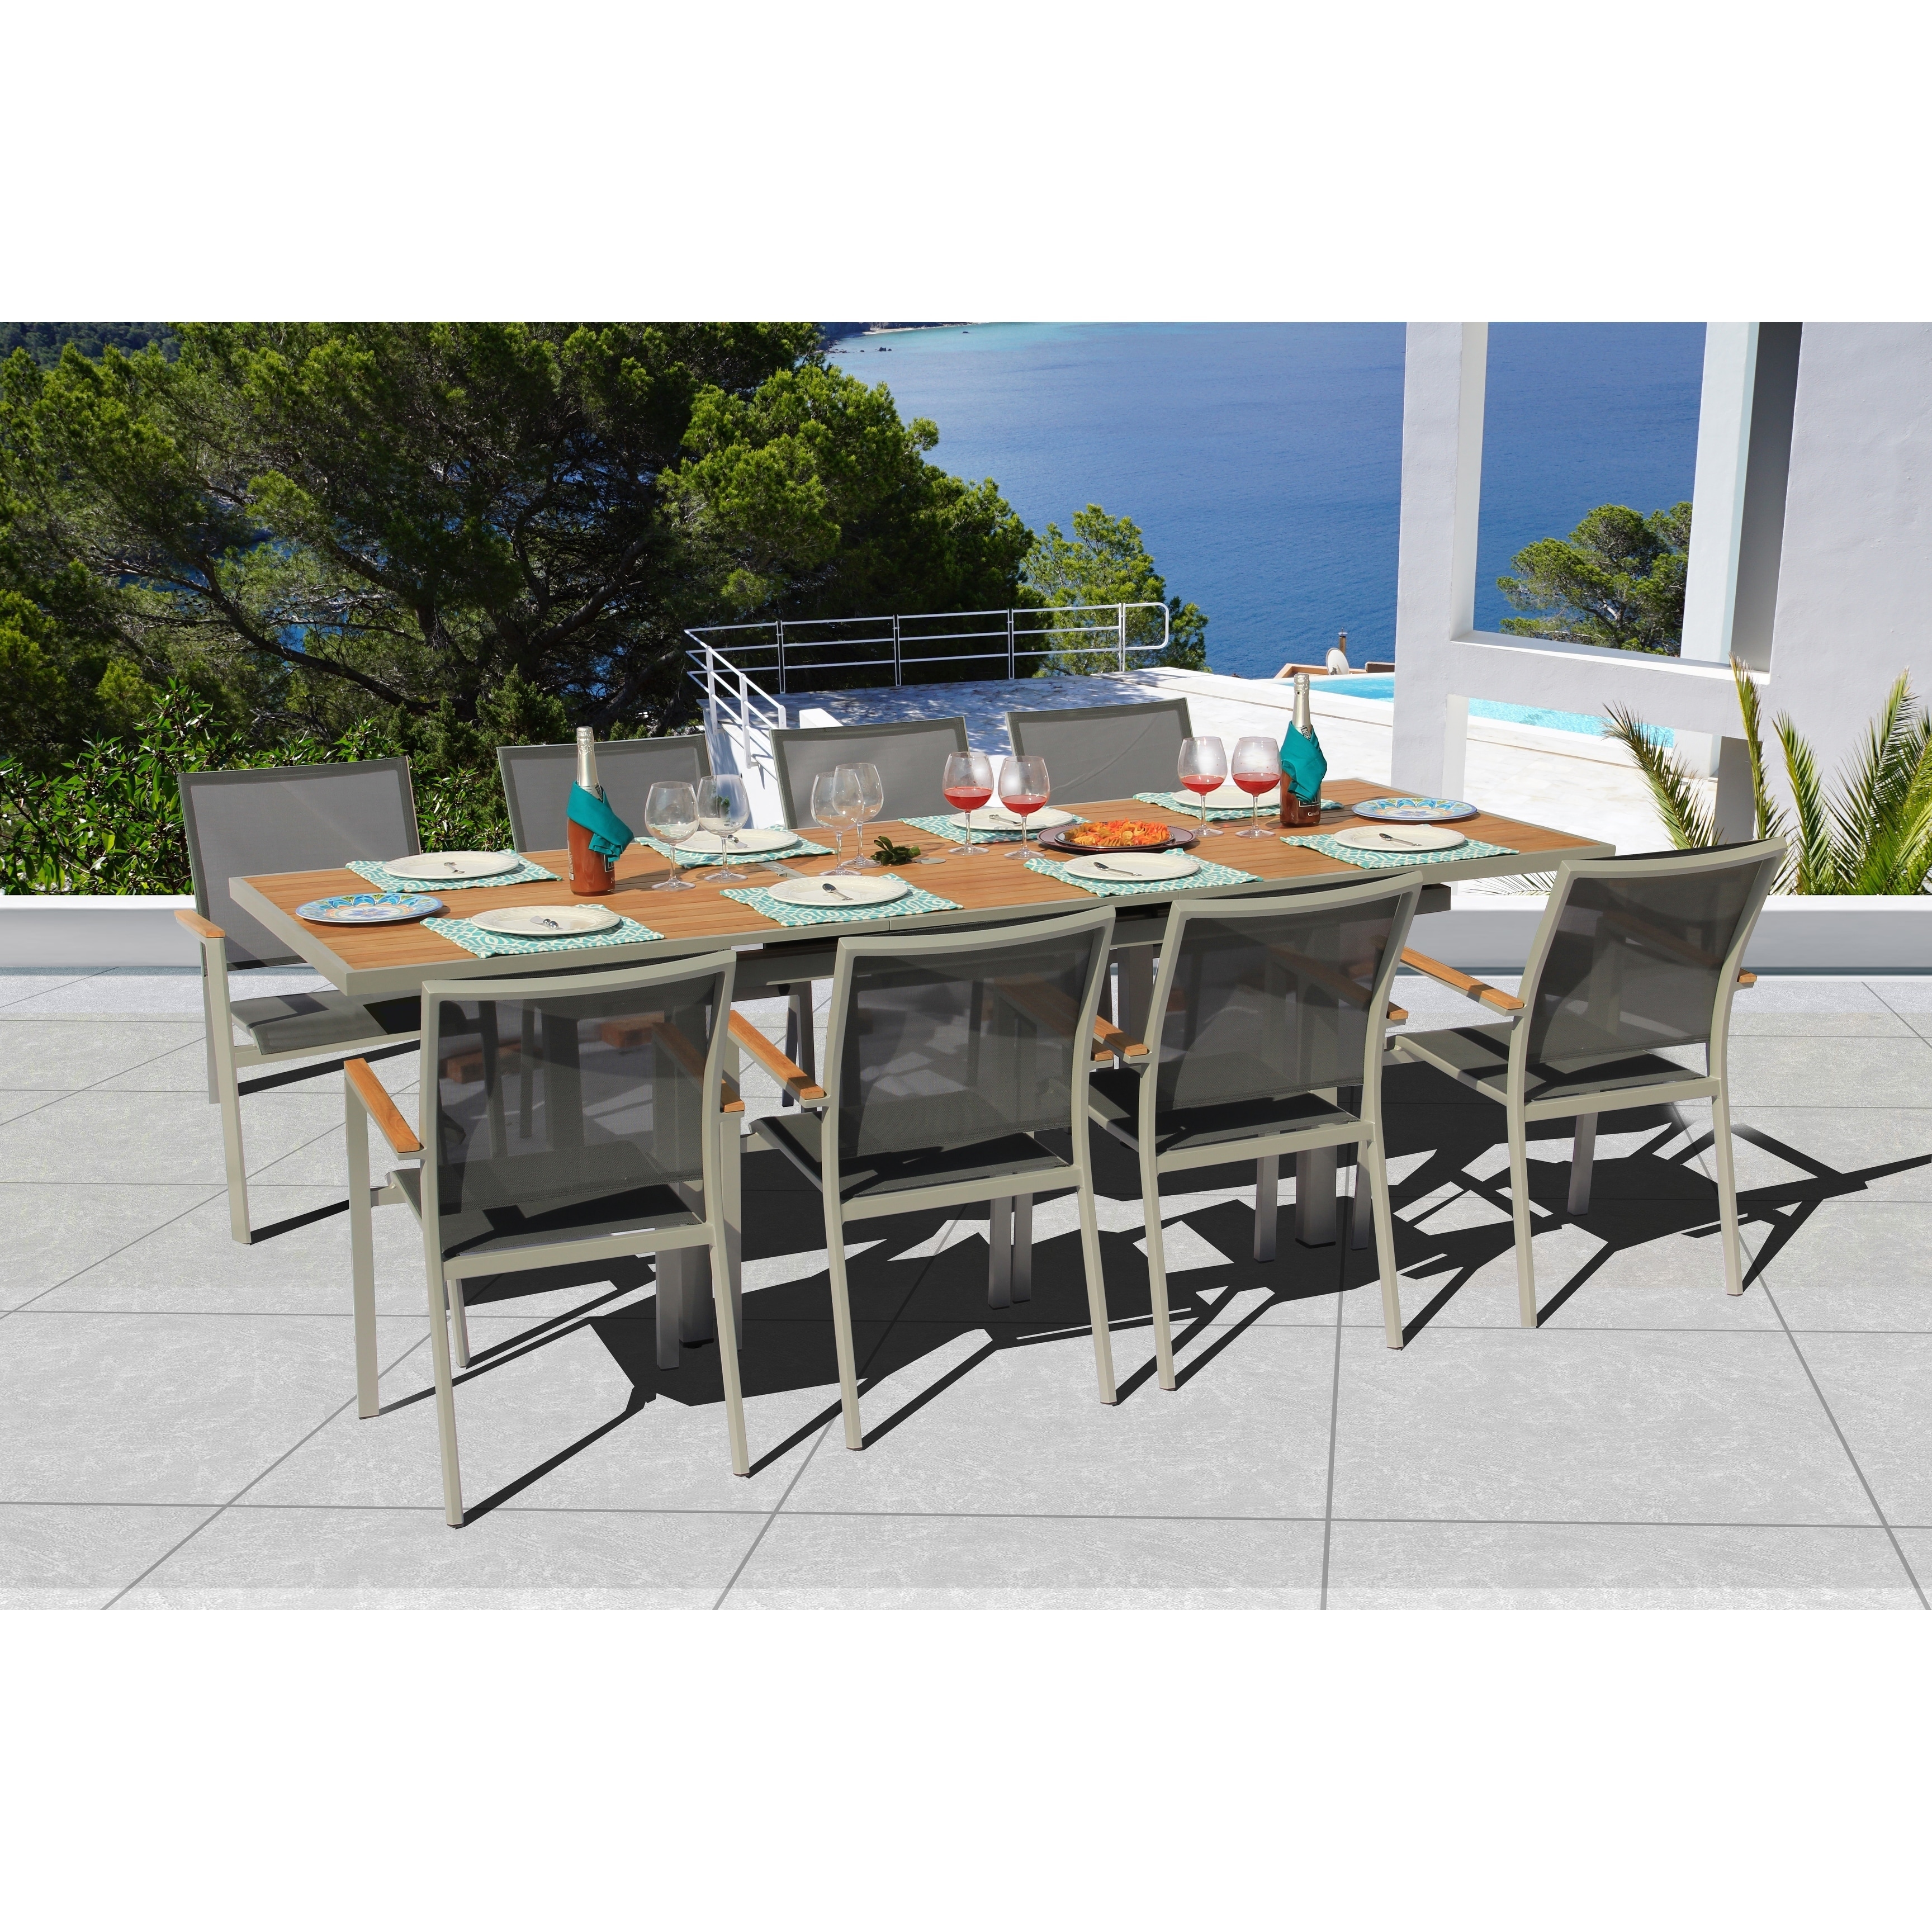 Essence 9 Pc Dining Set - Fabric Color_pewter